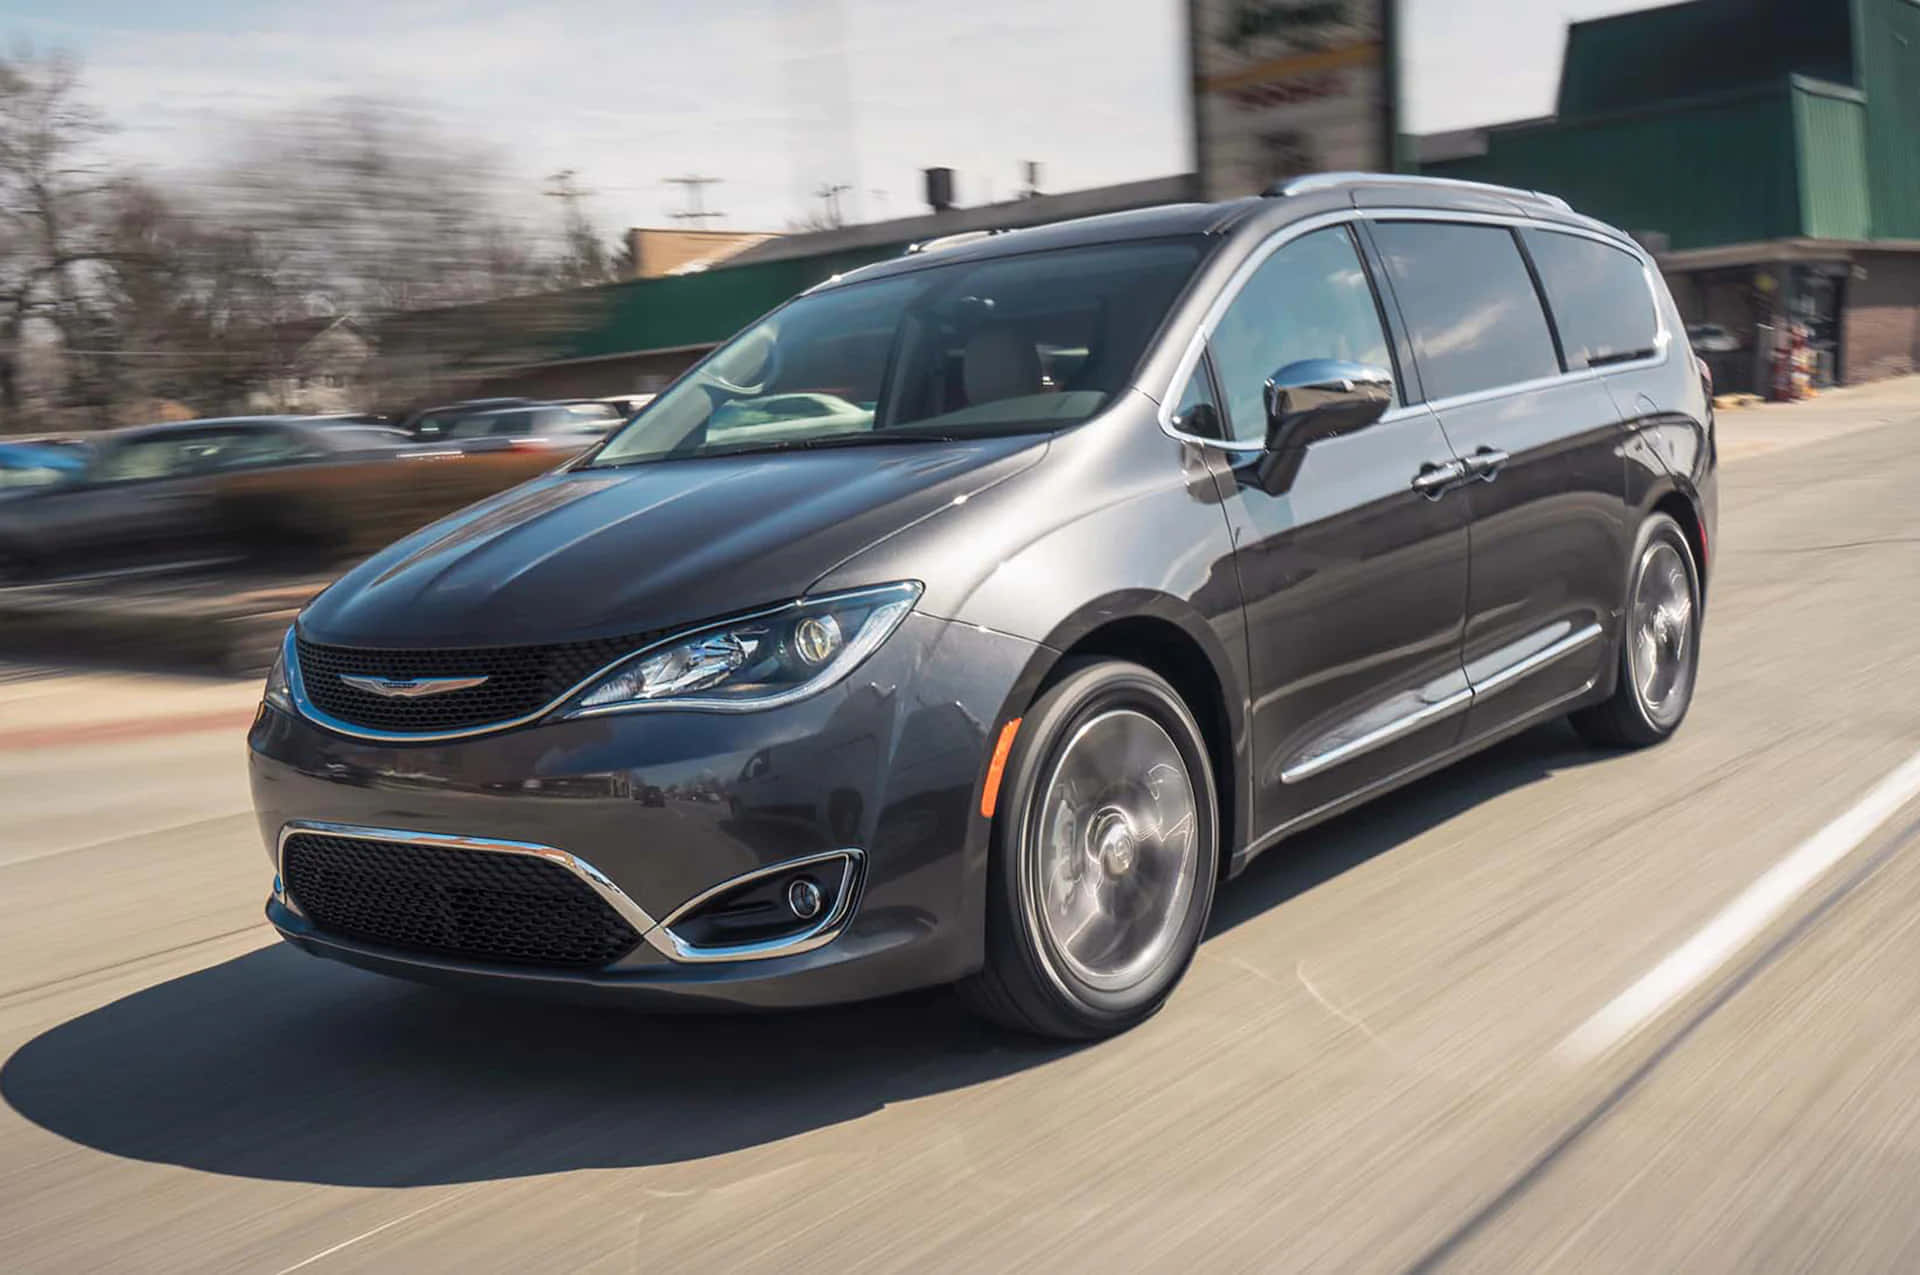 Stunning Chrysler Pacifica on the Road Wallpaper